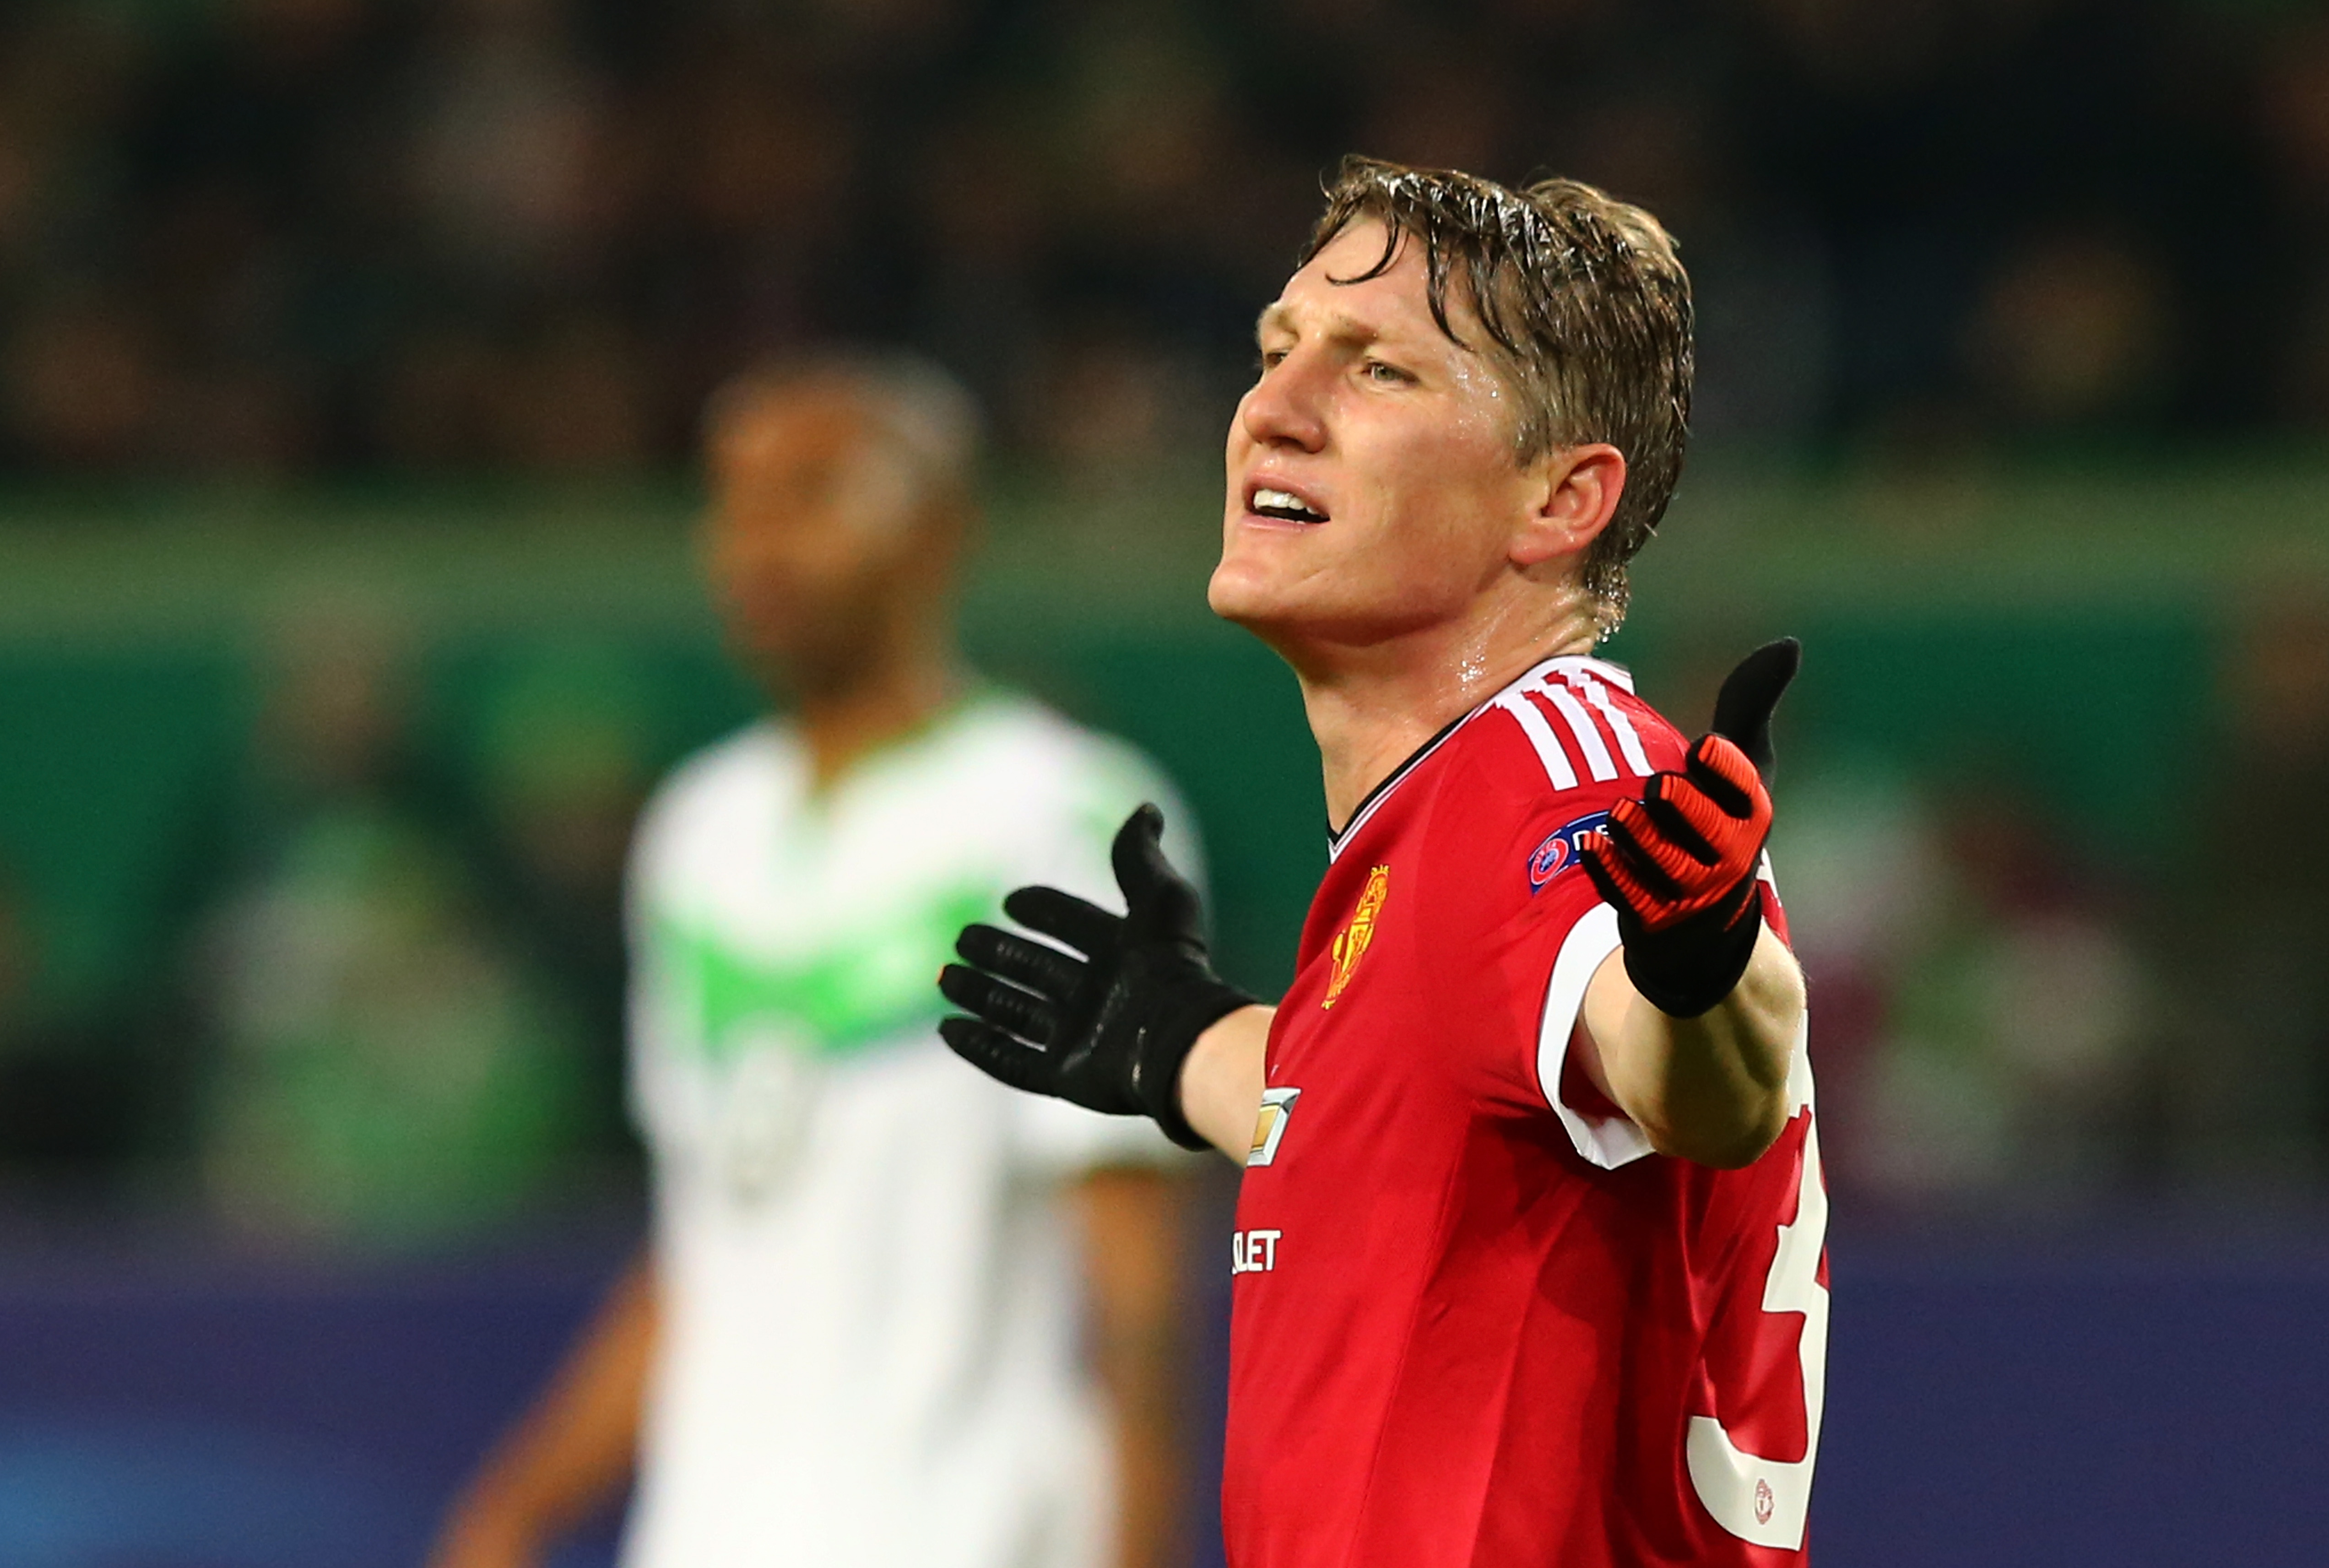 WOLFSBURG, GERMANY - DECEMBER 08:  Bastian Schweinsteiger of Manchester United reacts during the UEFA Champions League group B match between VfL Wolfsburg and Manchester United at the Volkswagen Arena on December 8, 2015 in Wolfsburg, Germany.  (Photo by Martin Rose/Bongarts/Getty Images)